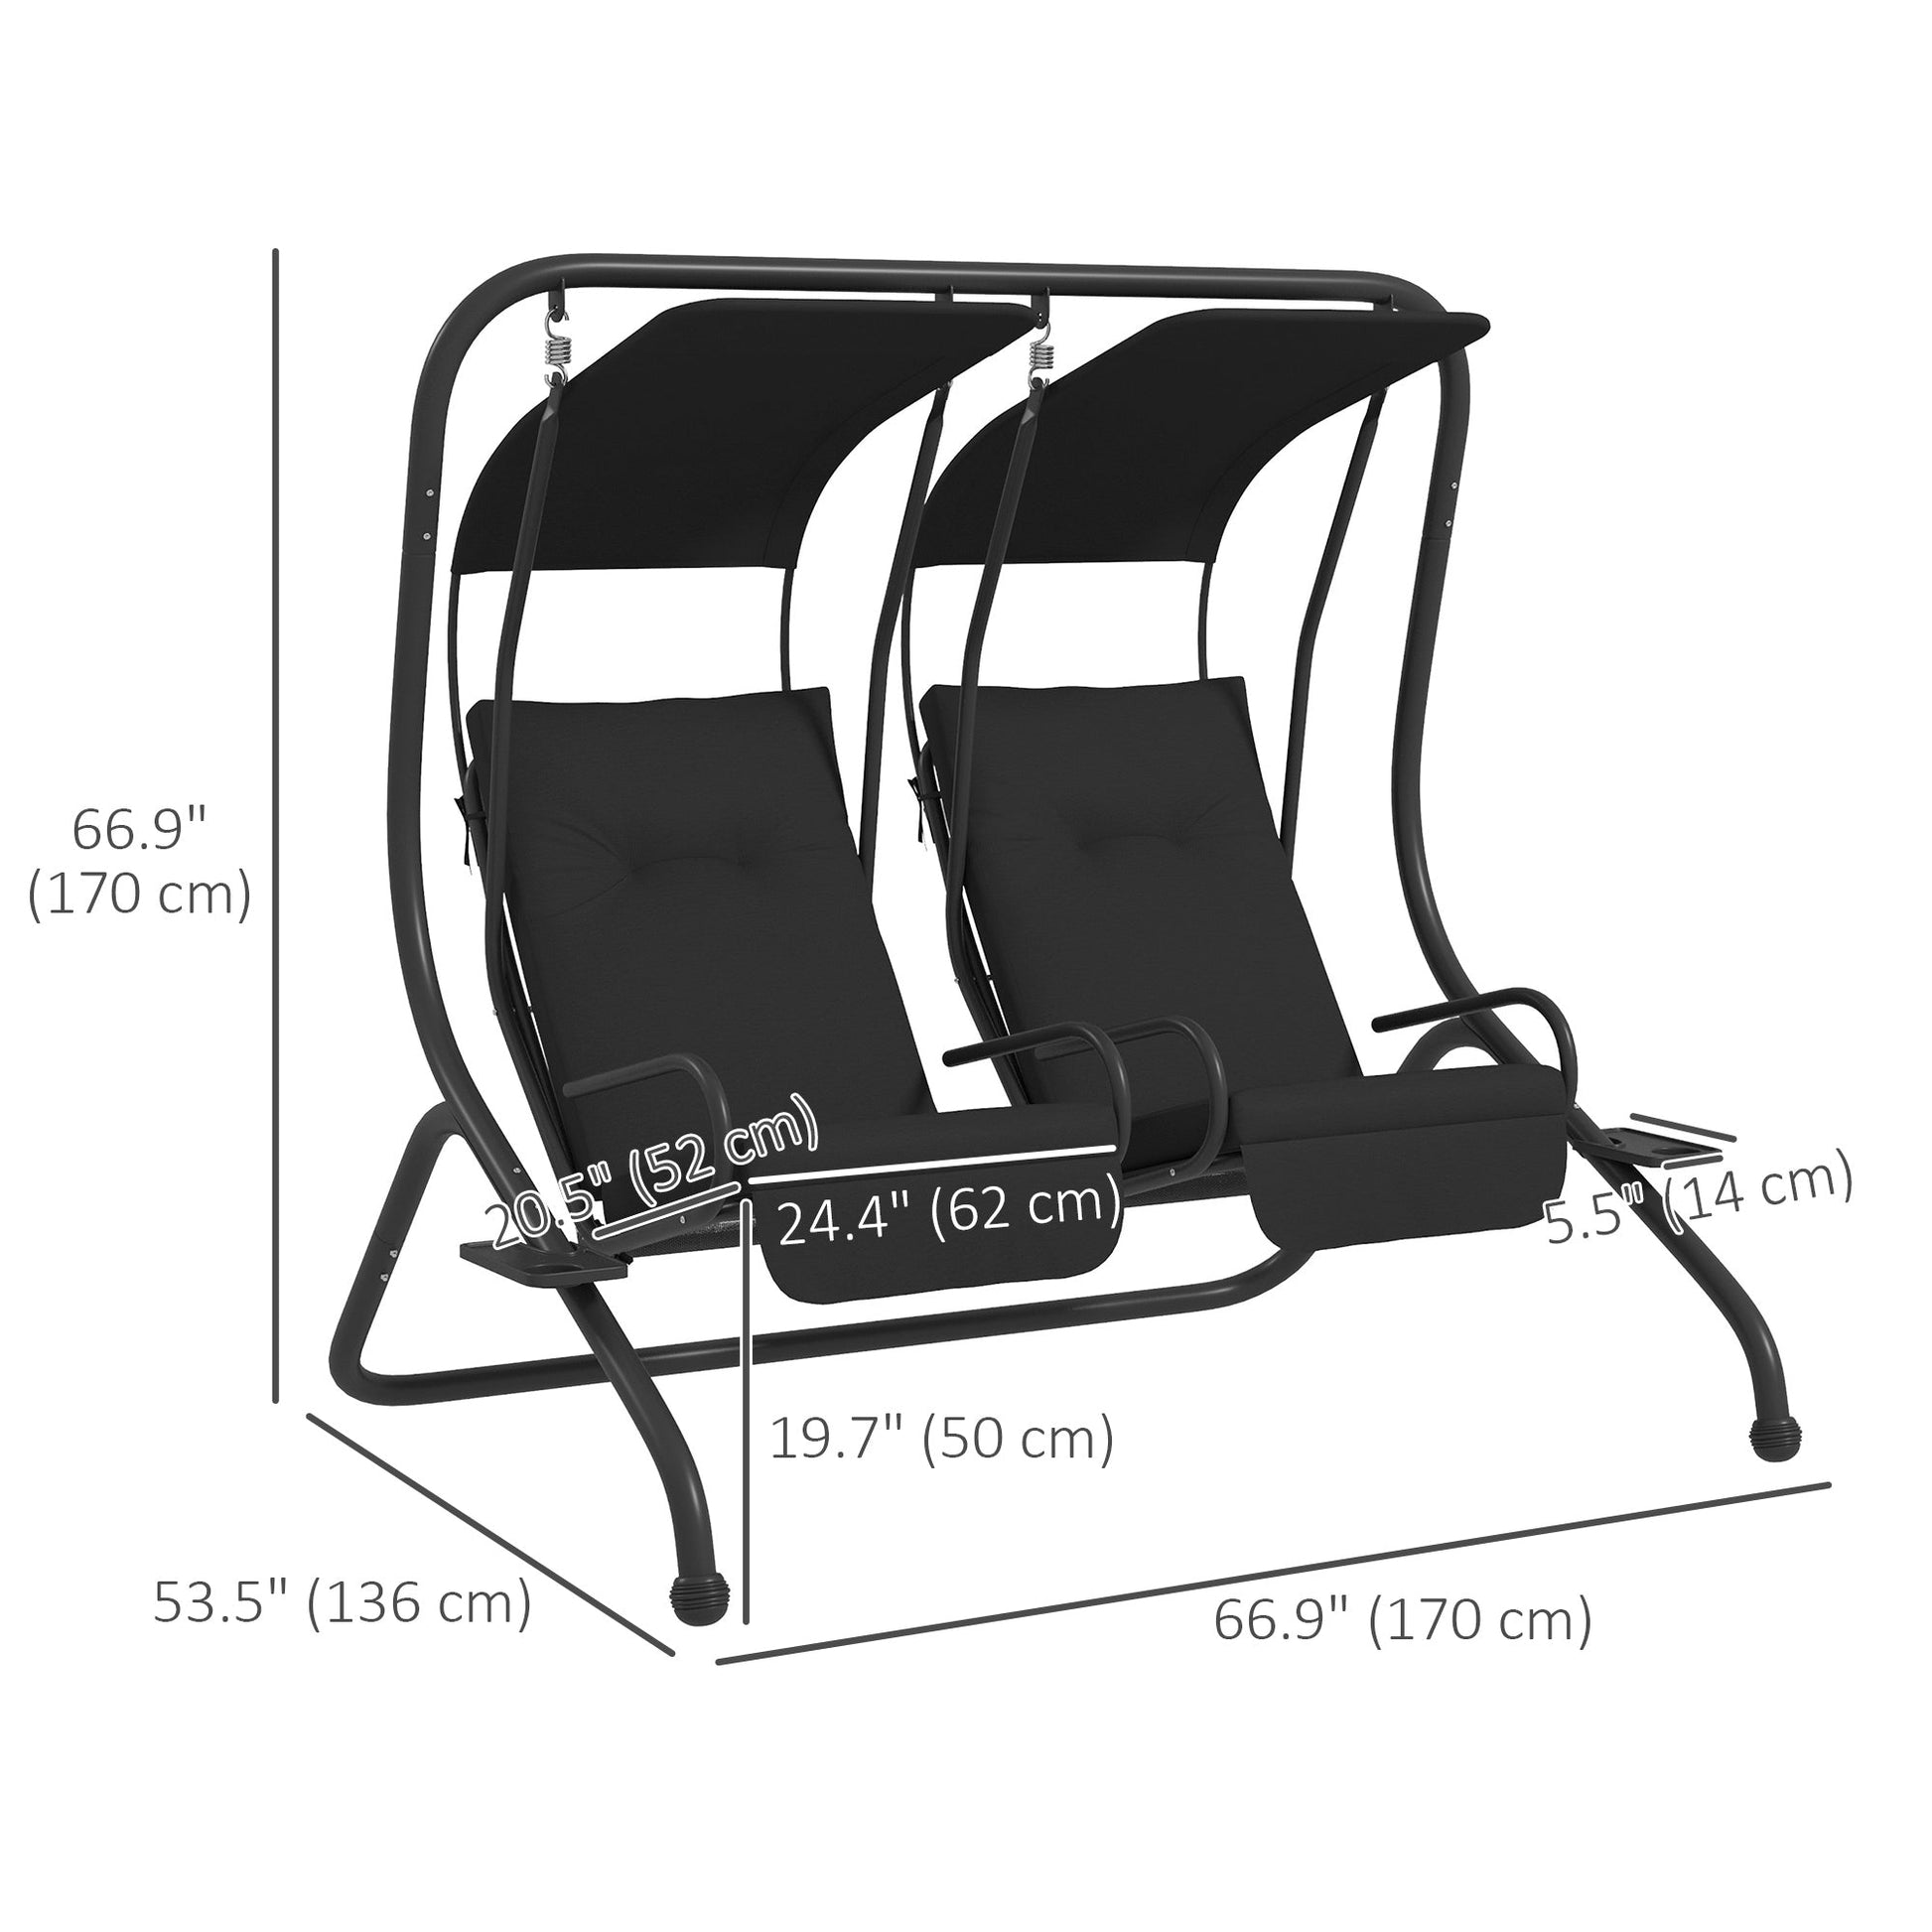 2-Seater Outdoor Porch Swing with Canopy, Patio Swing Chair for Garden, Poolside, Backyard, Black - Gallery Canada